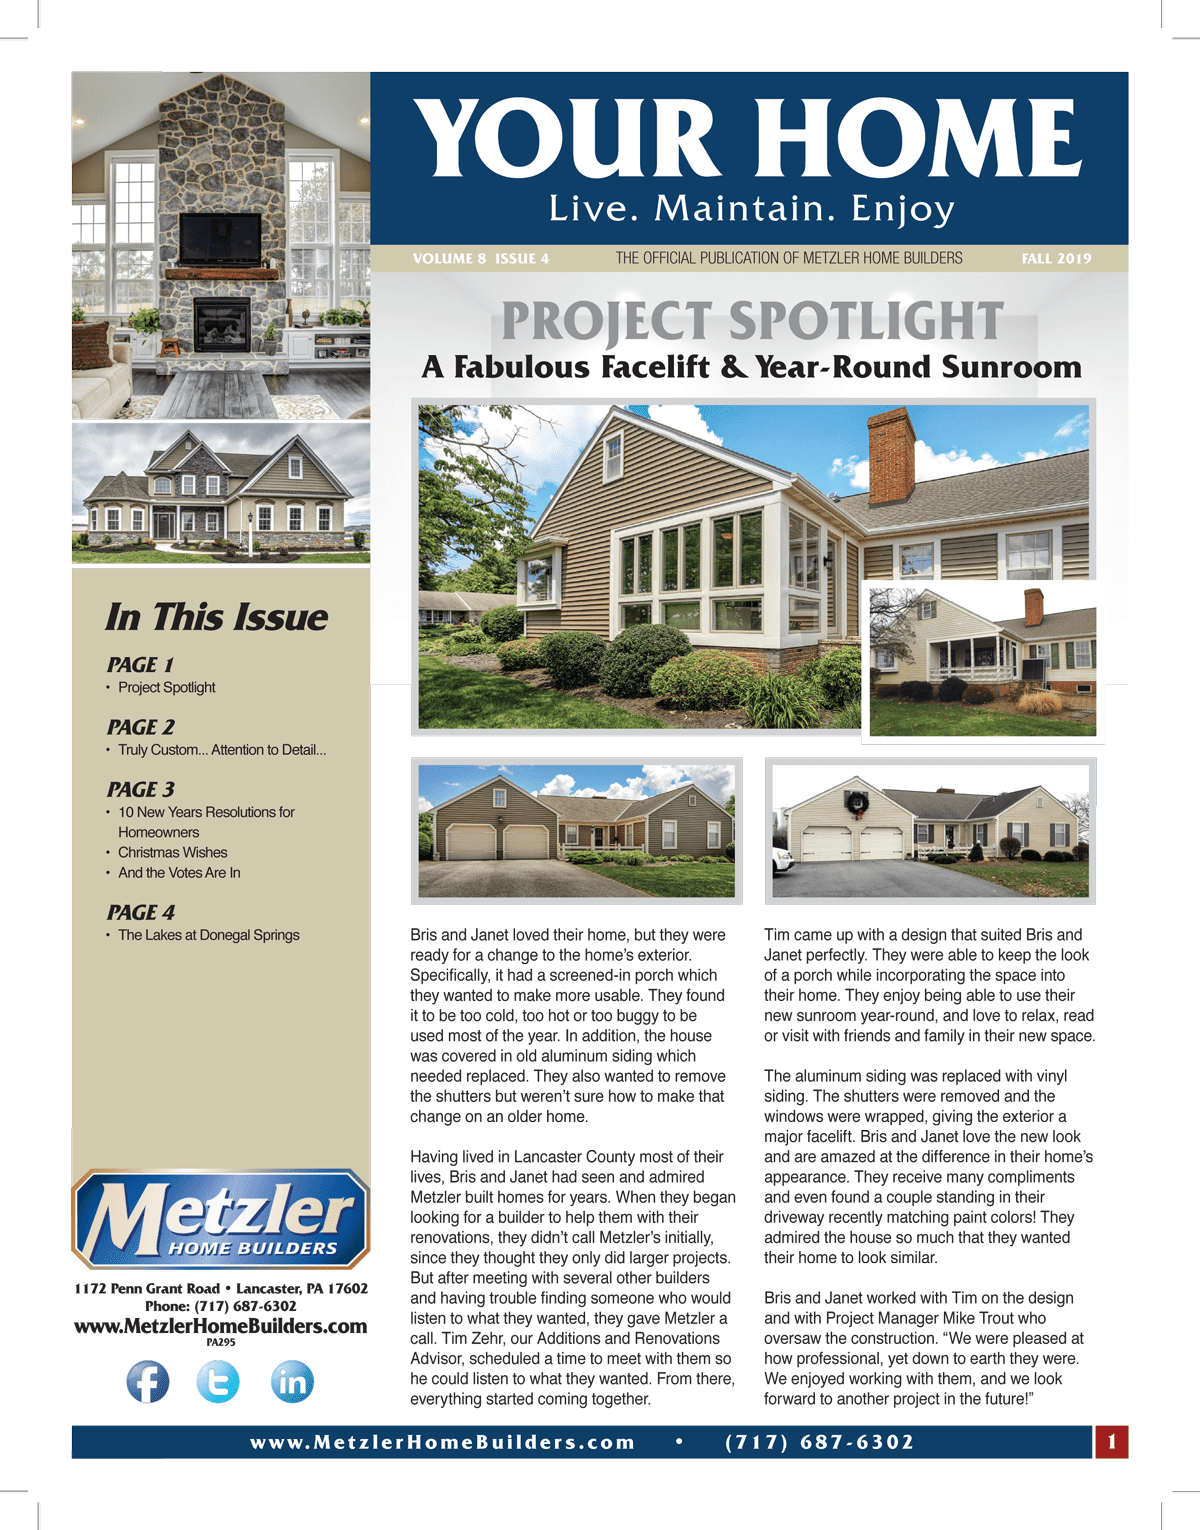 Metzler 'Your Home' Newsletter PDF cover for Volume 8 Issue 4